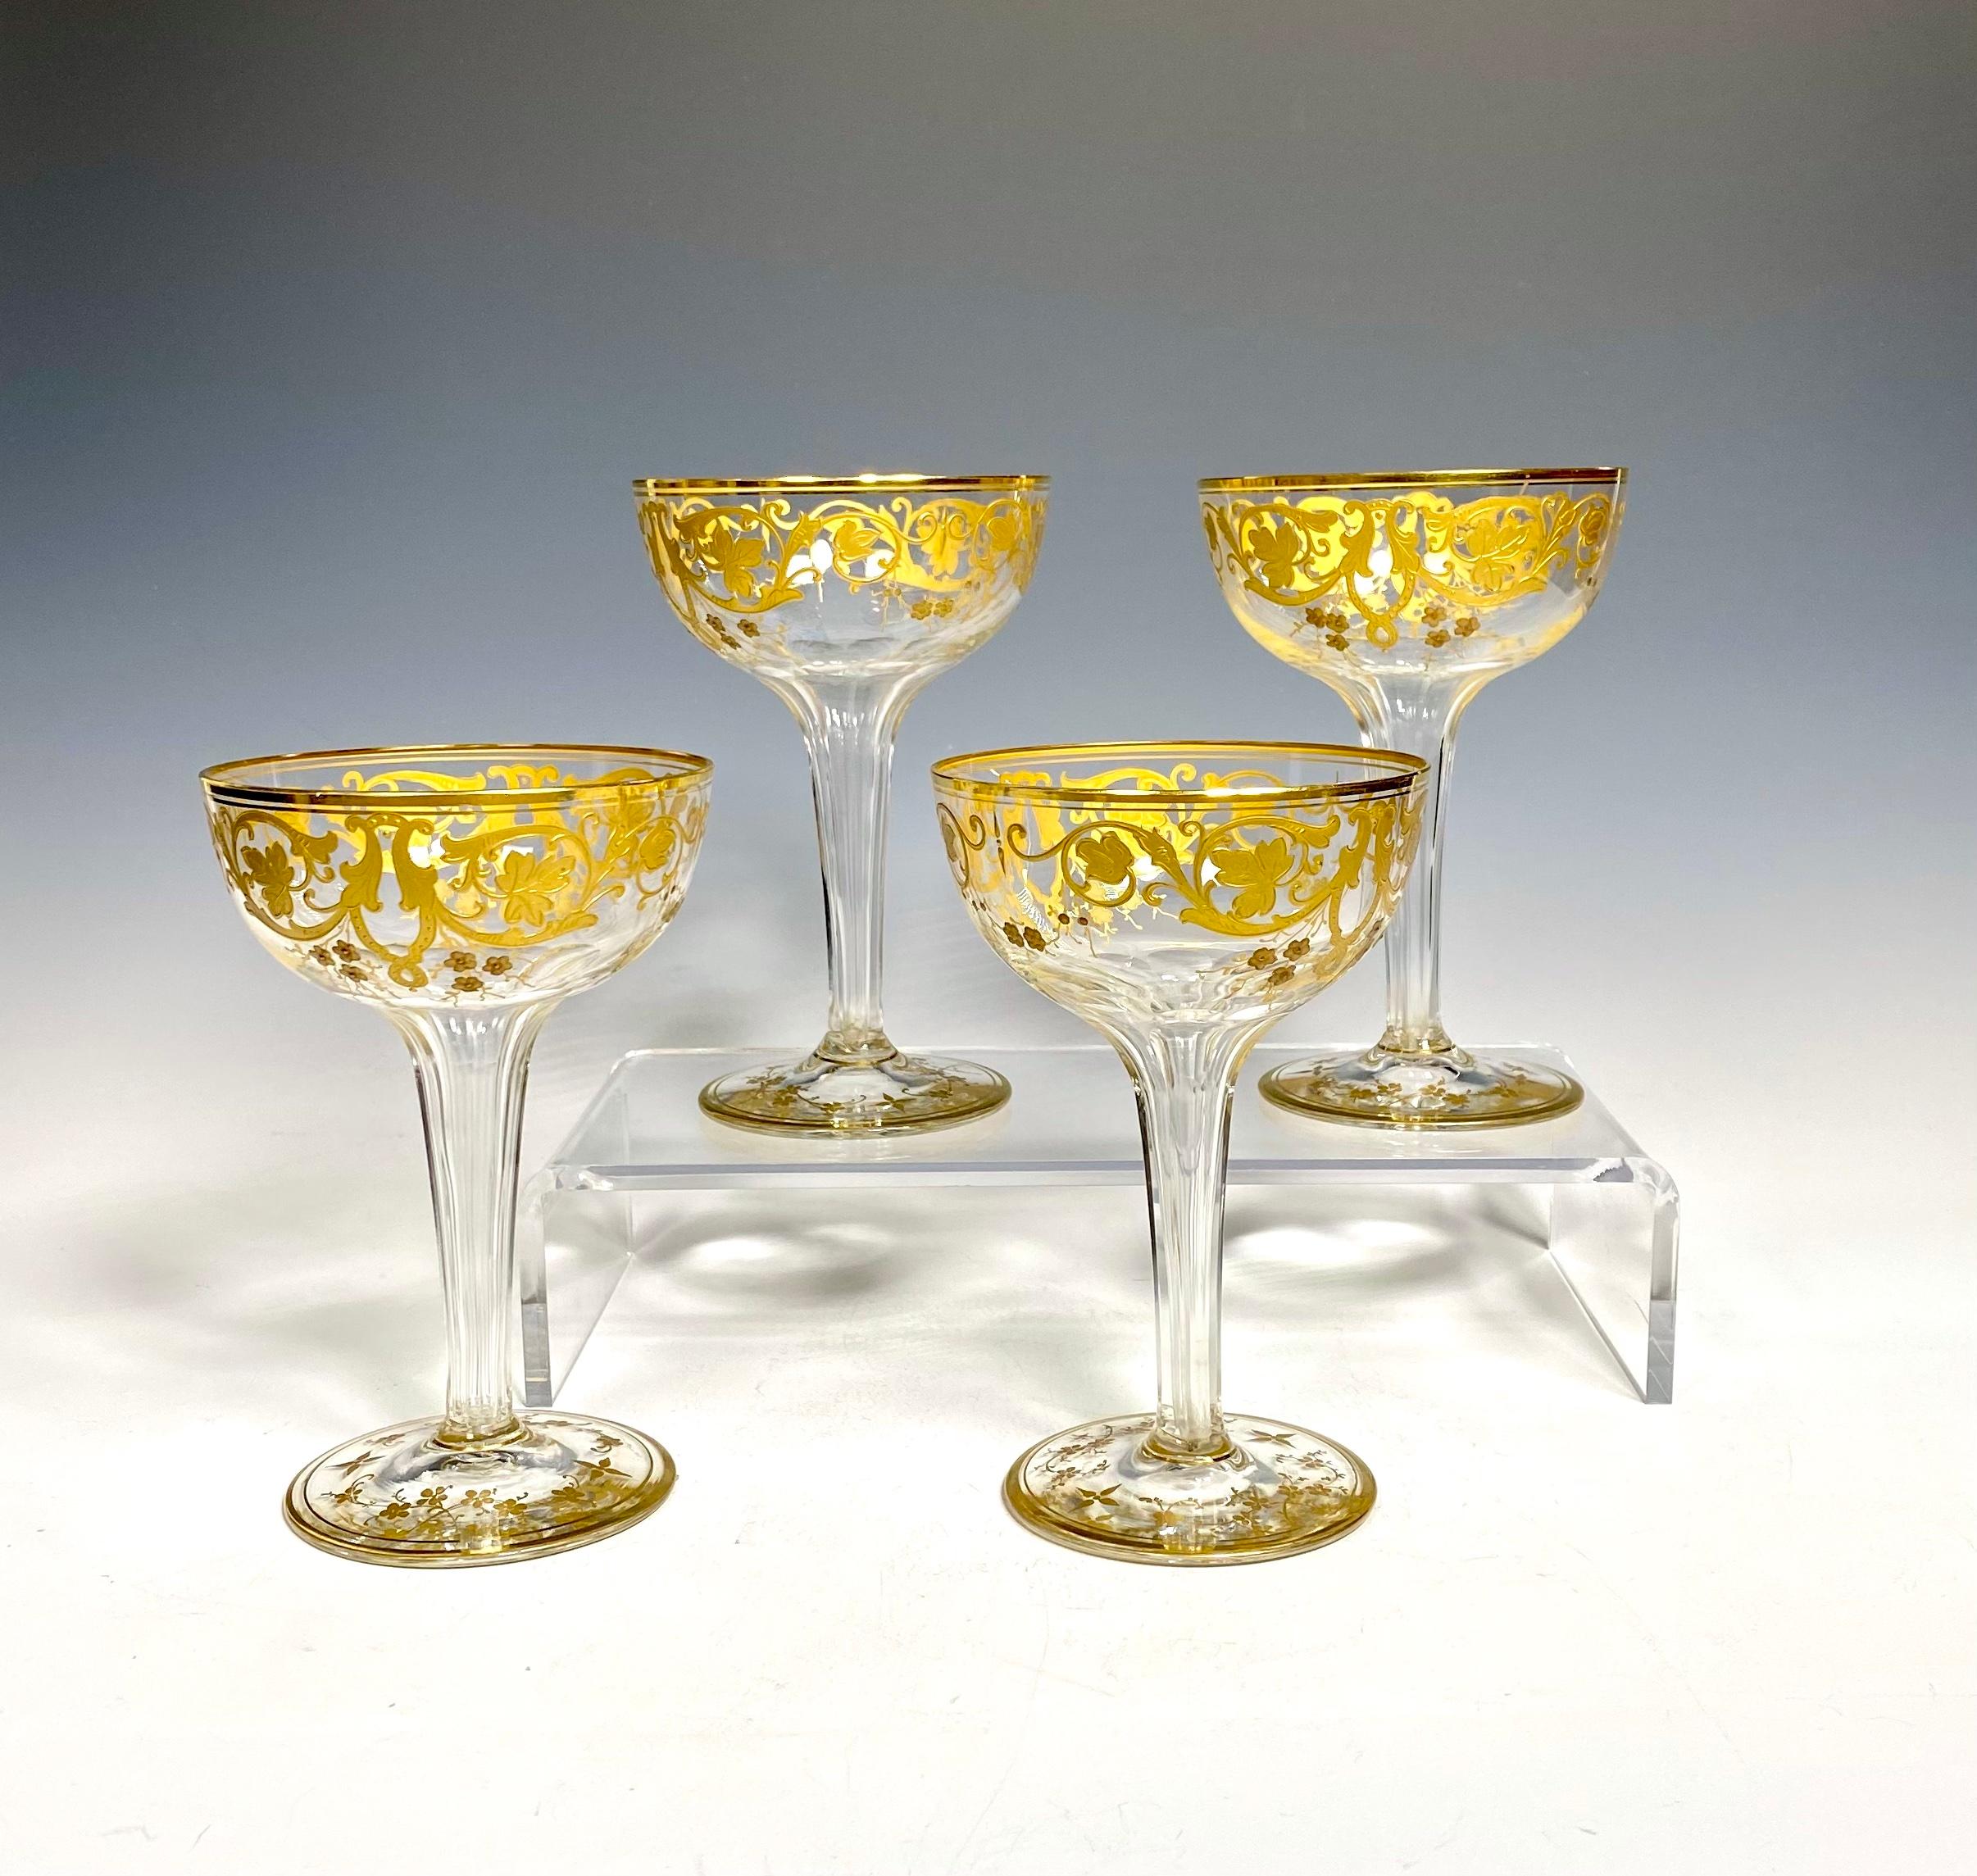 
Elevate your next celebration with these exquisite Baccarat gilt hollow stem champagne coupes. Crafted with precision and care, these glasses are an elegant addition to any drinkware collection. Perfect for special occasions or as a luxurious gift,